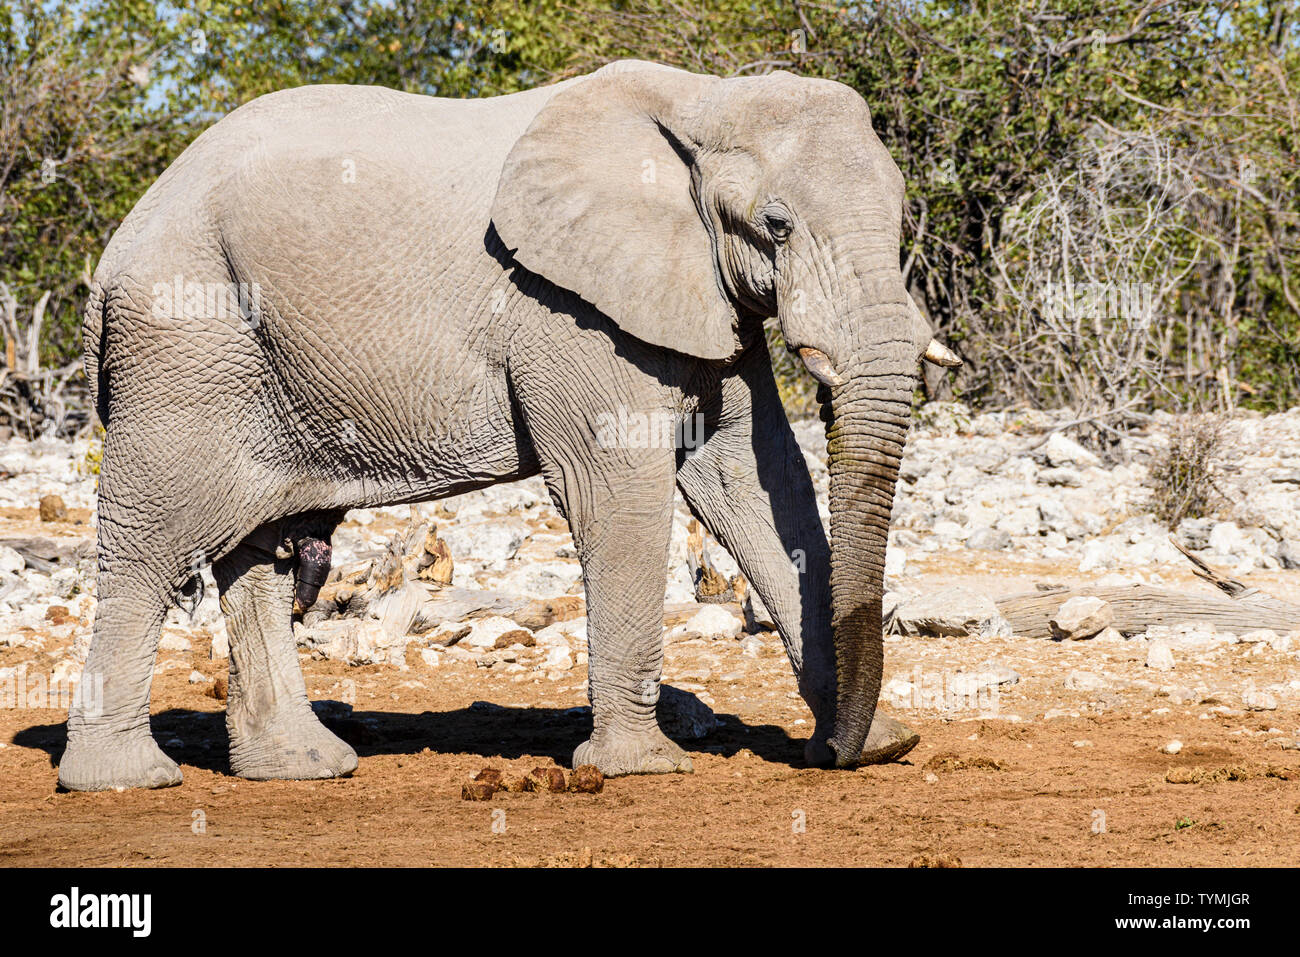 African elephant in Namibia.  Elephants in Etosha suffer from a lack of phosphor, making their tusks slow growing and brittle.  They have very short t Stock Photo